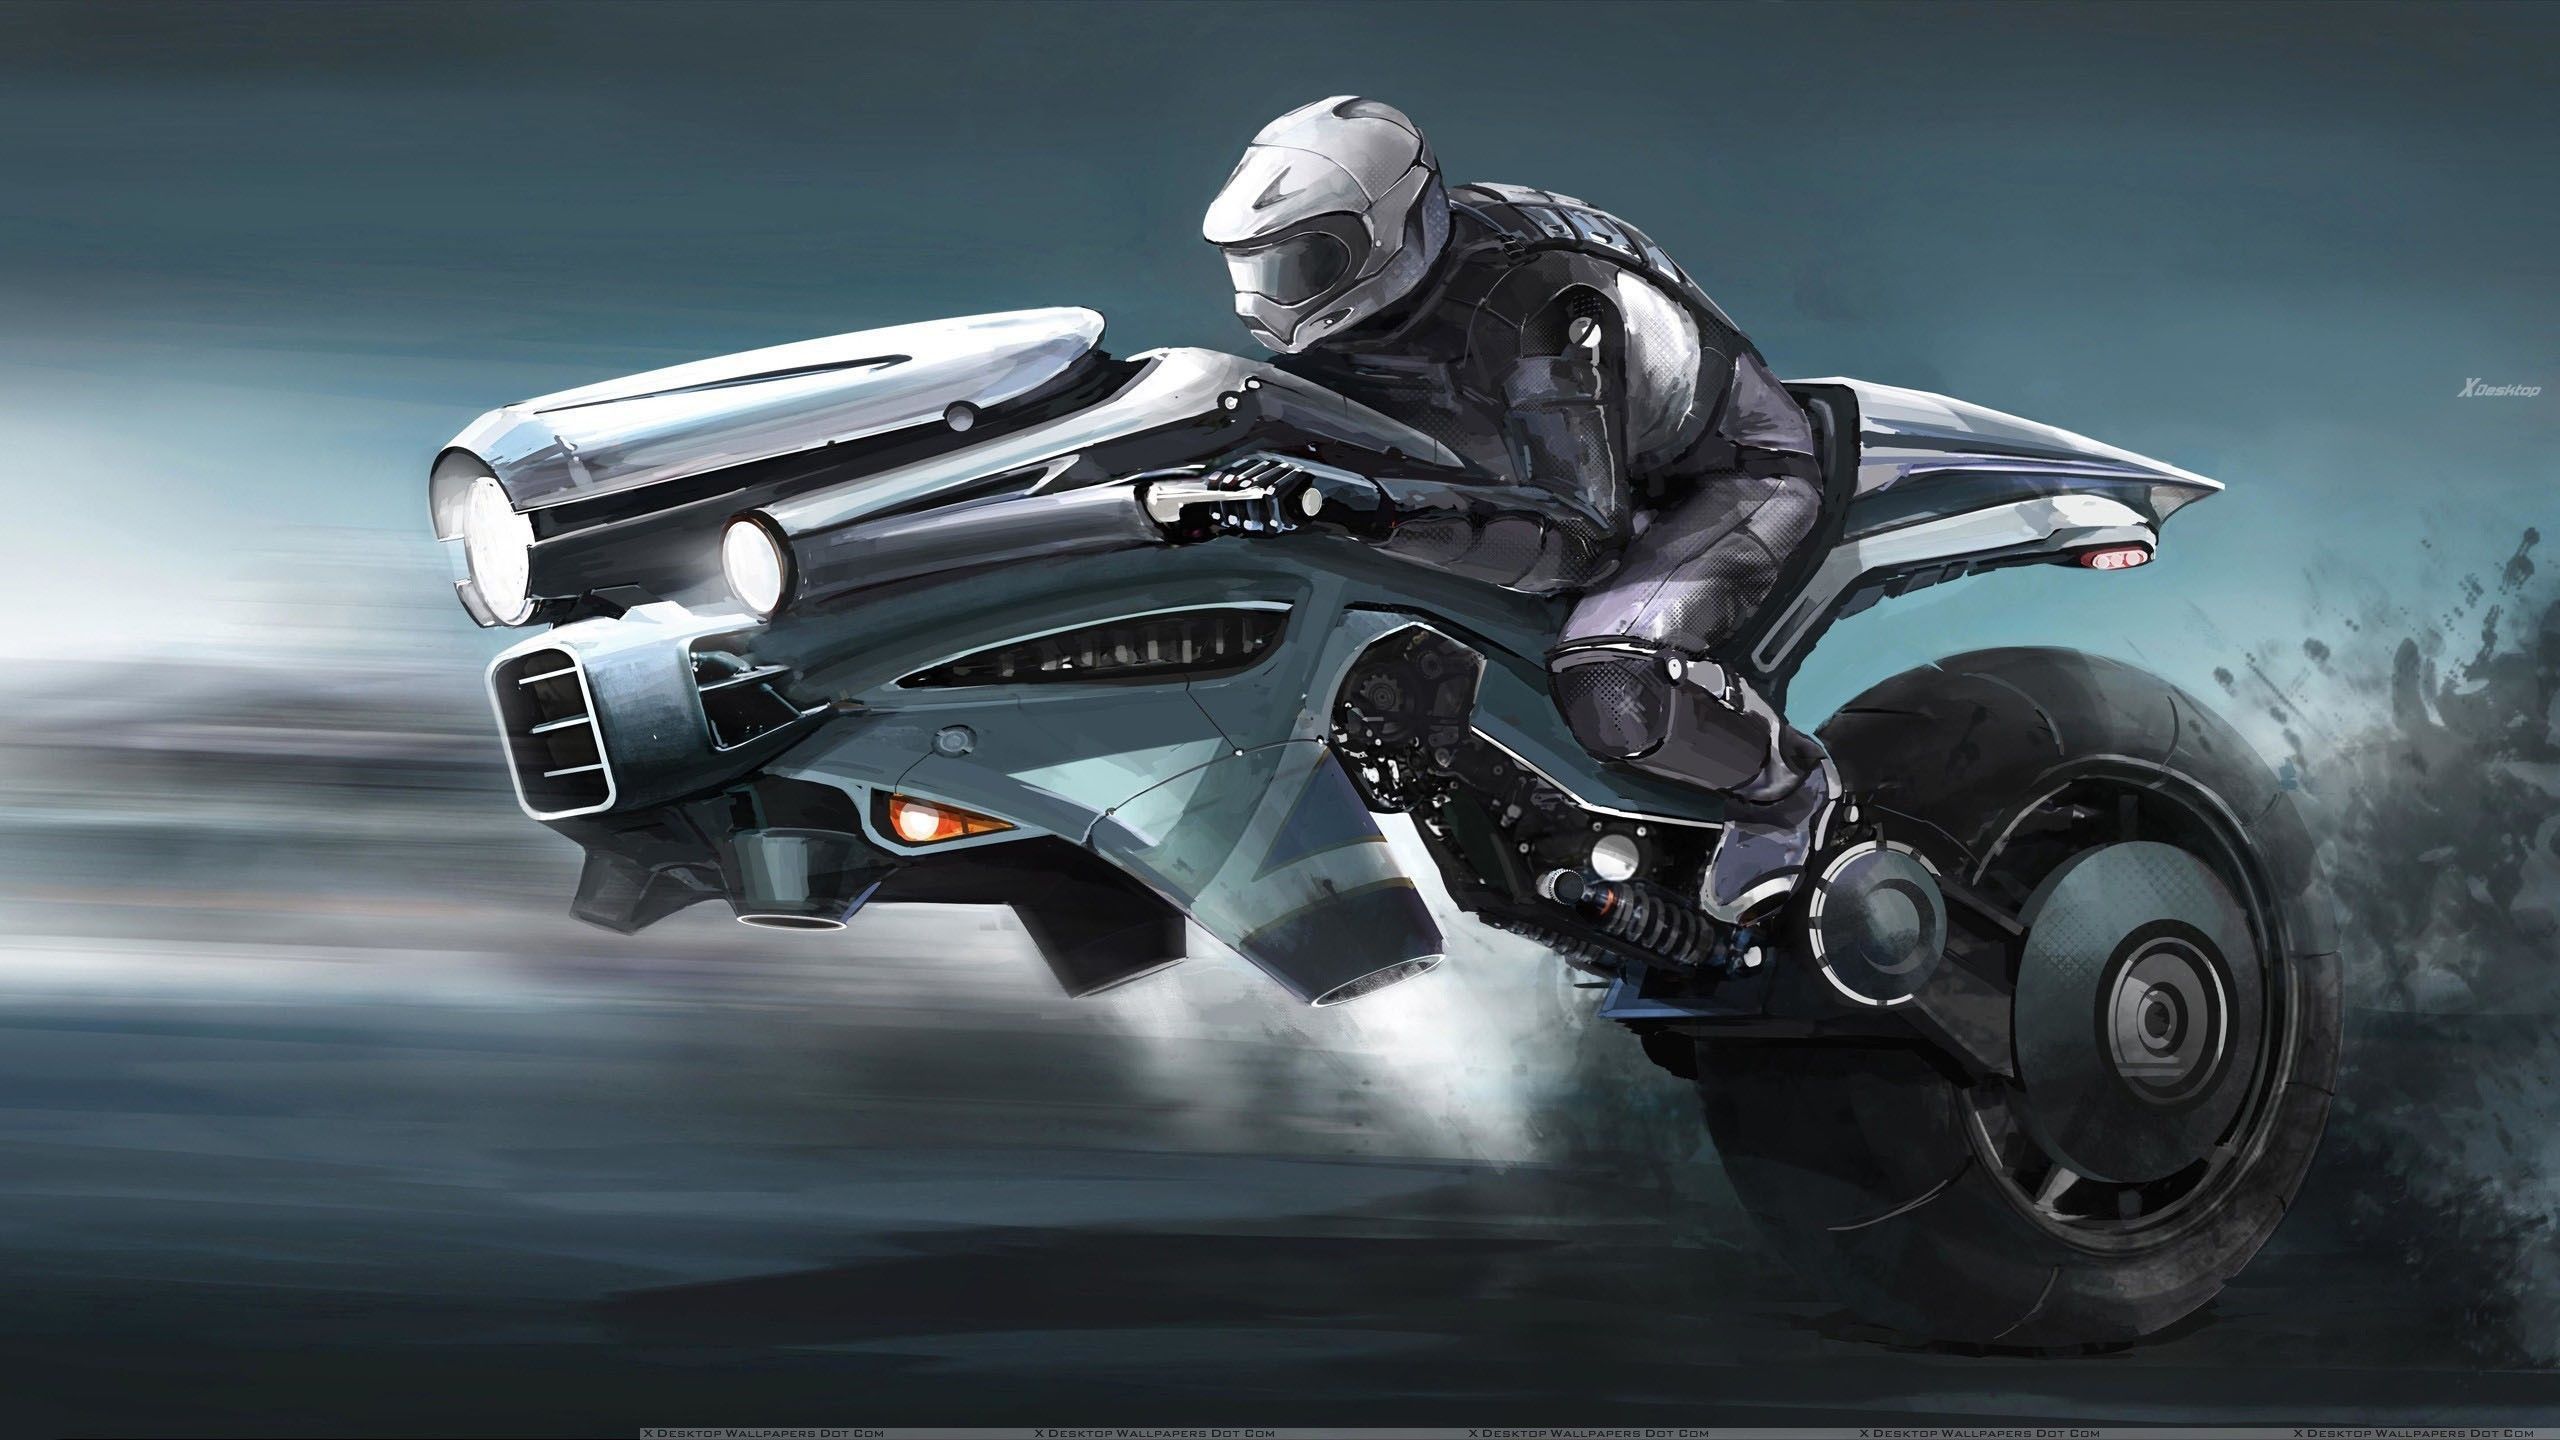 Motorcycling in the future probably will not look like this